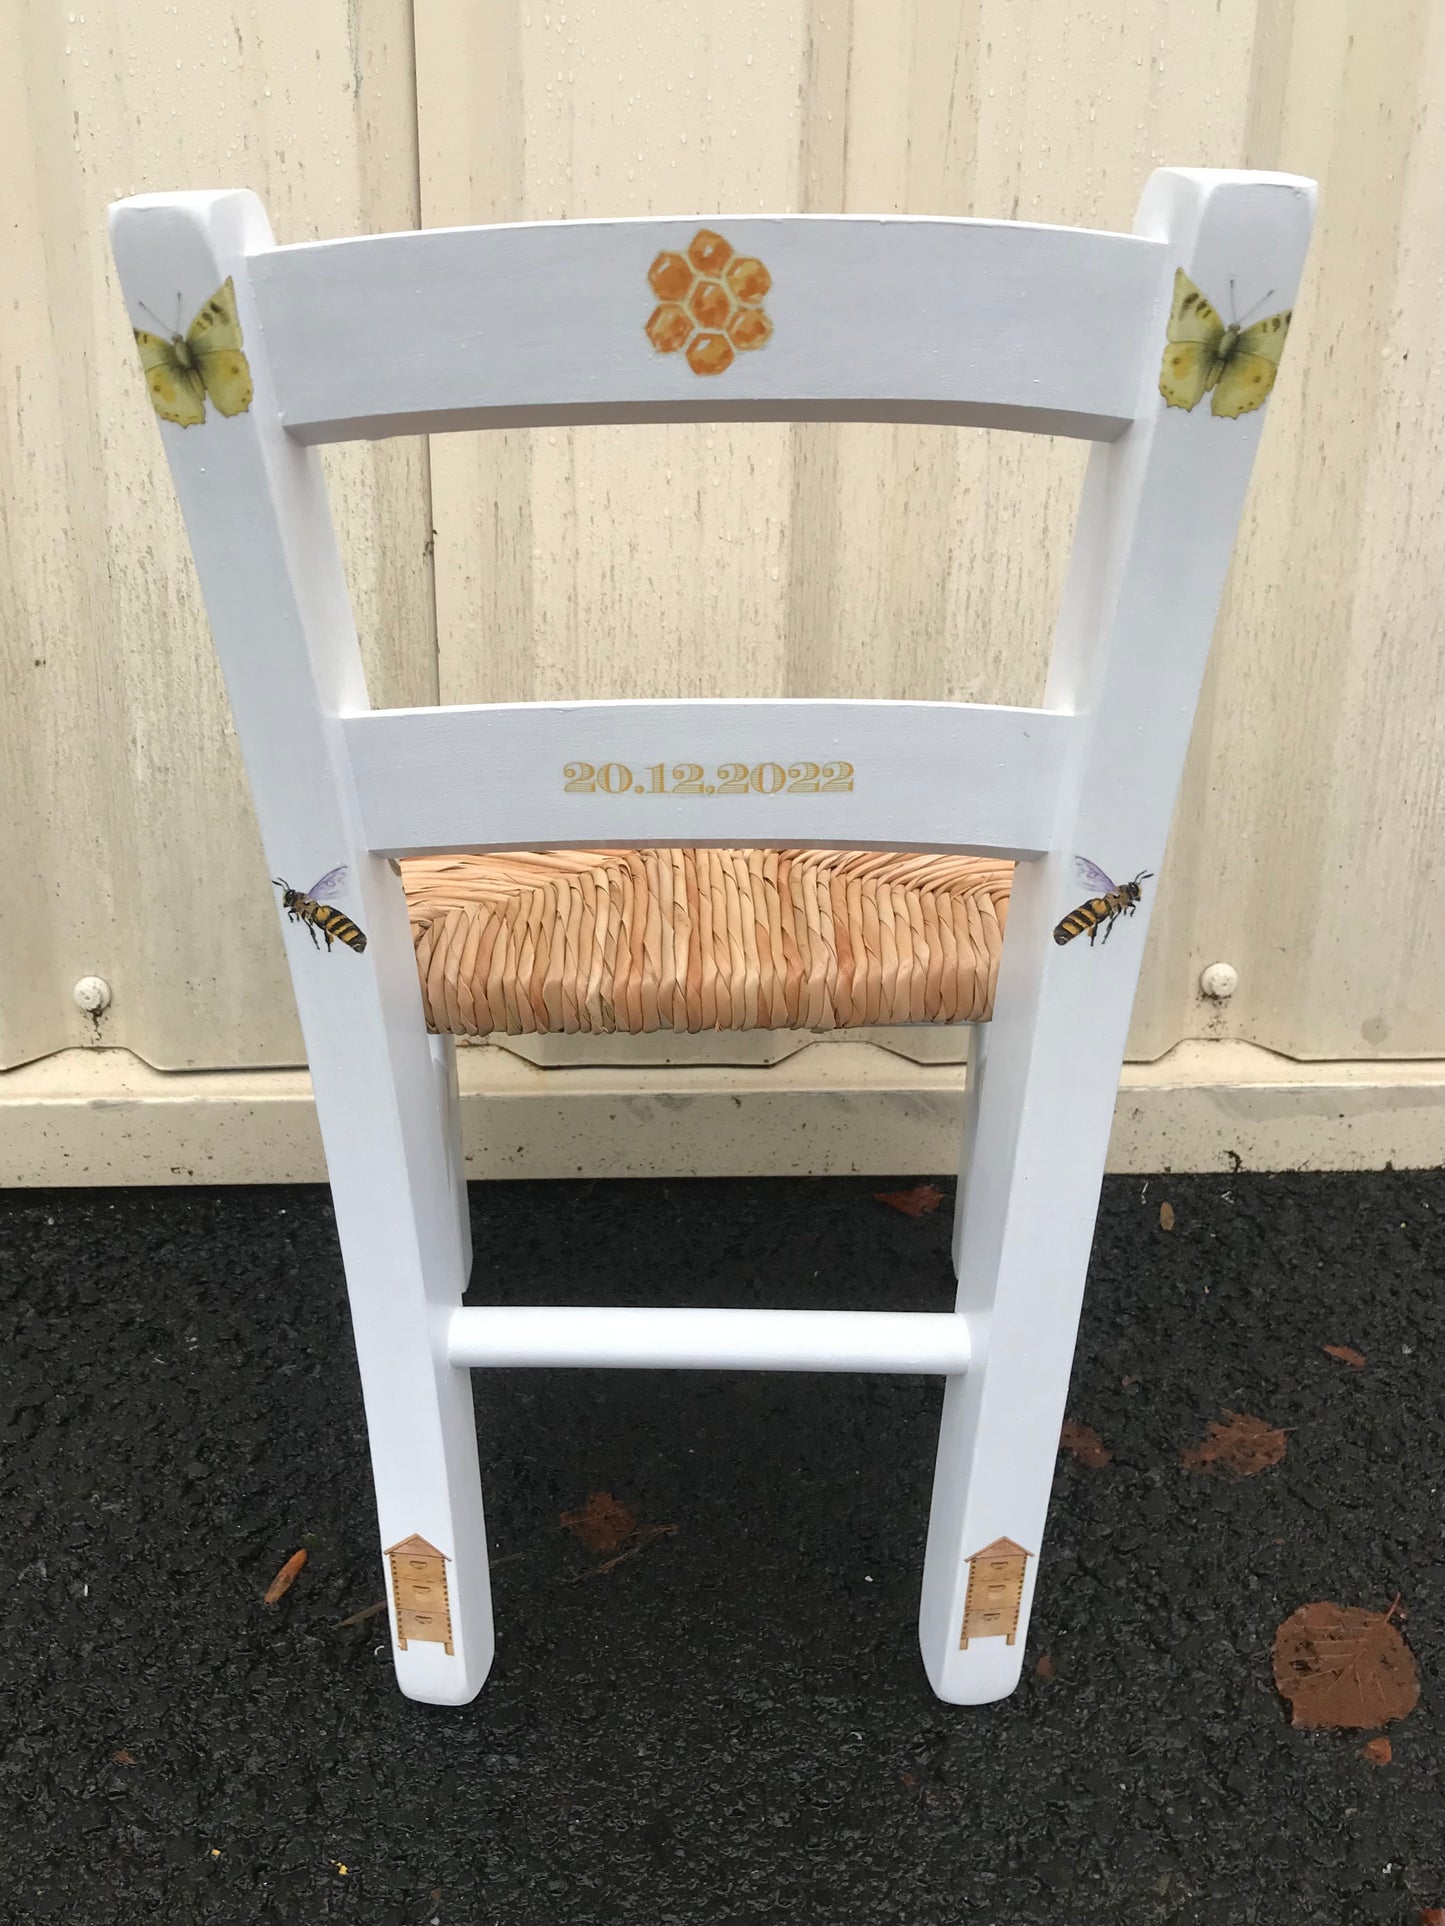 Rush seat personalised children's chair - Bee Keeper theme - made to order